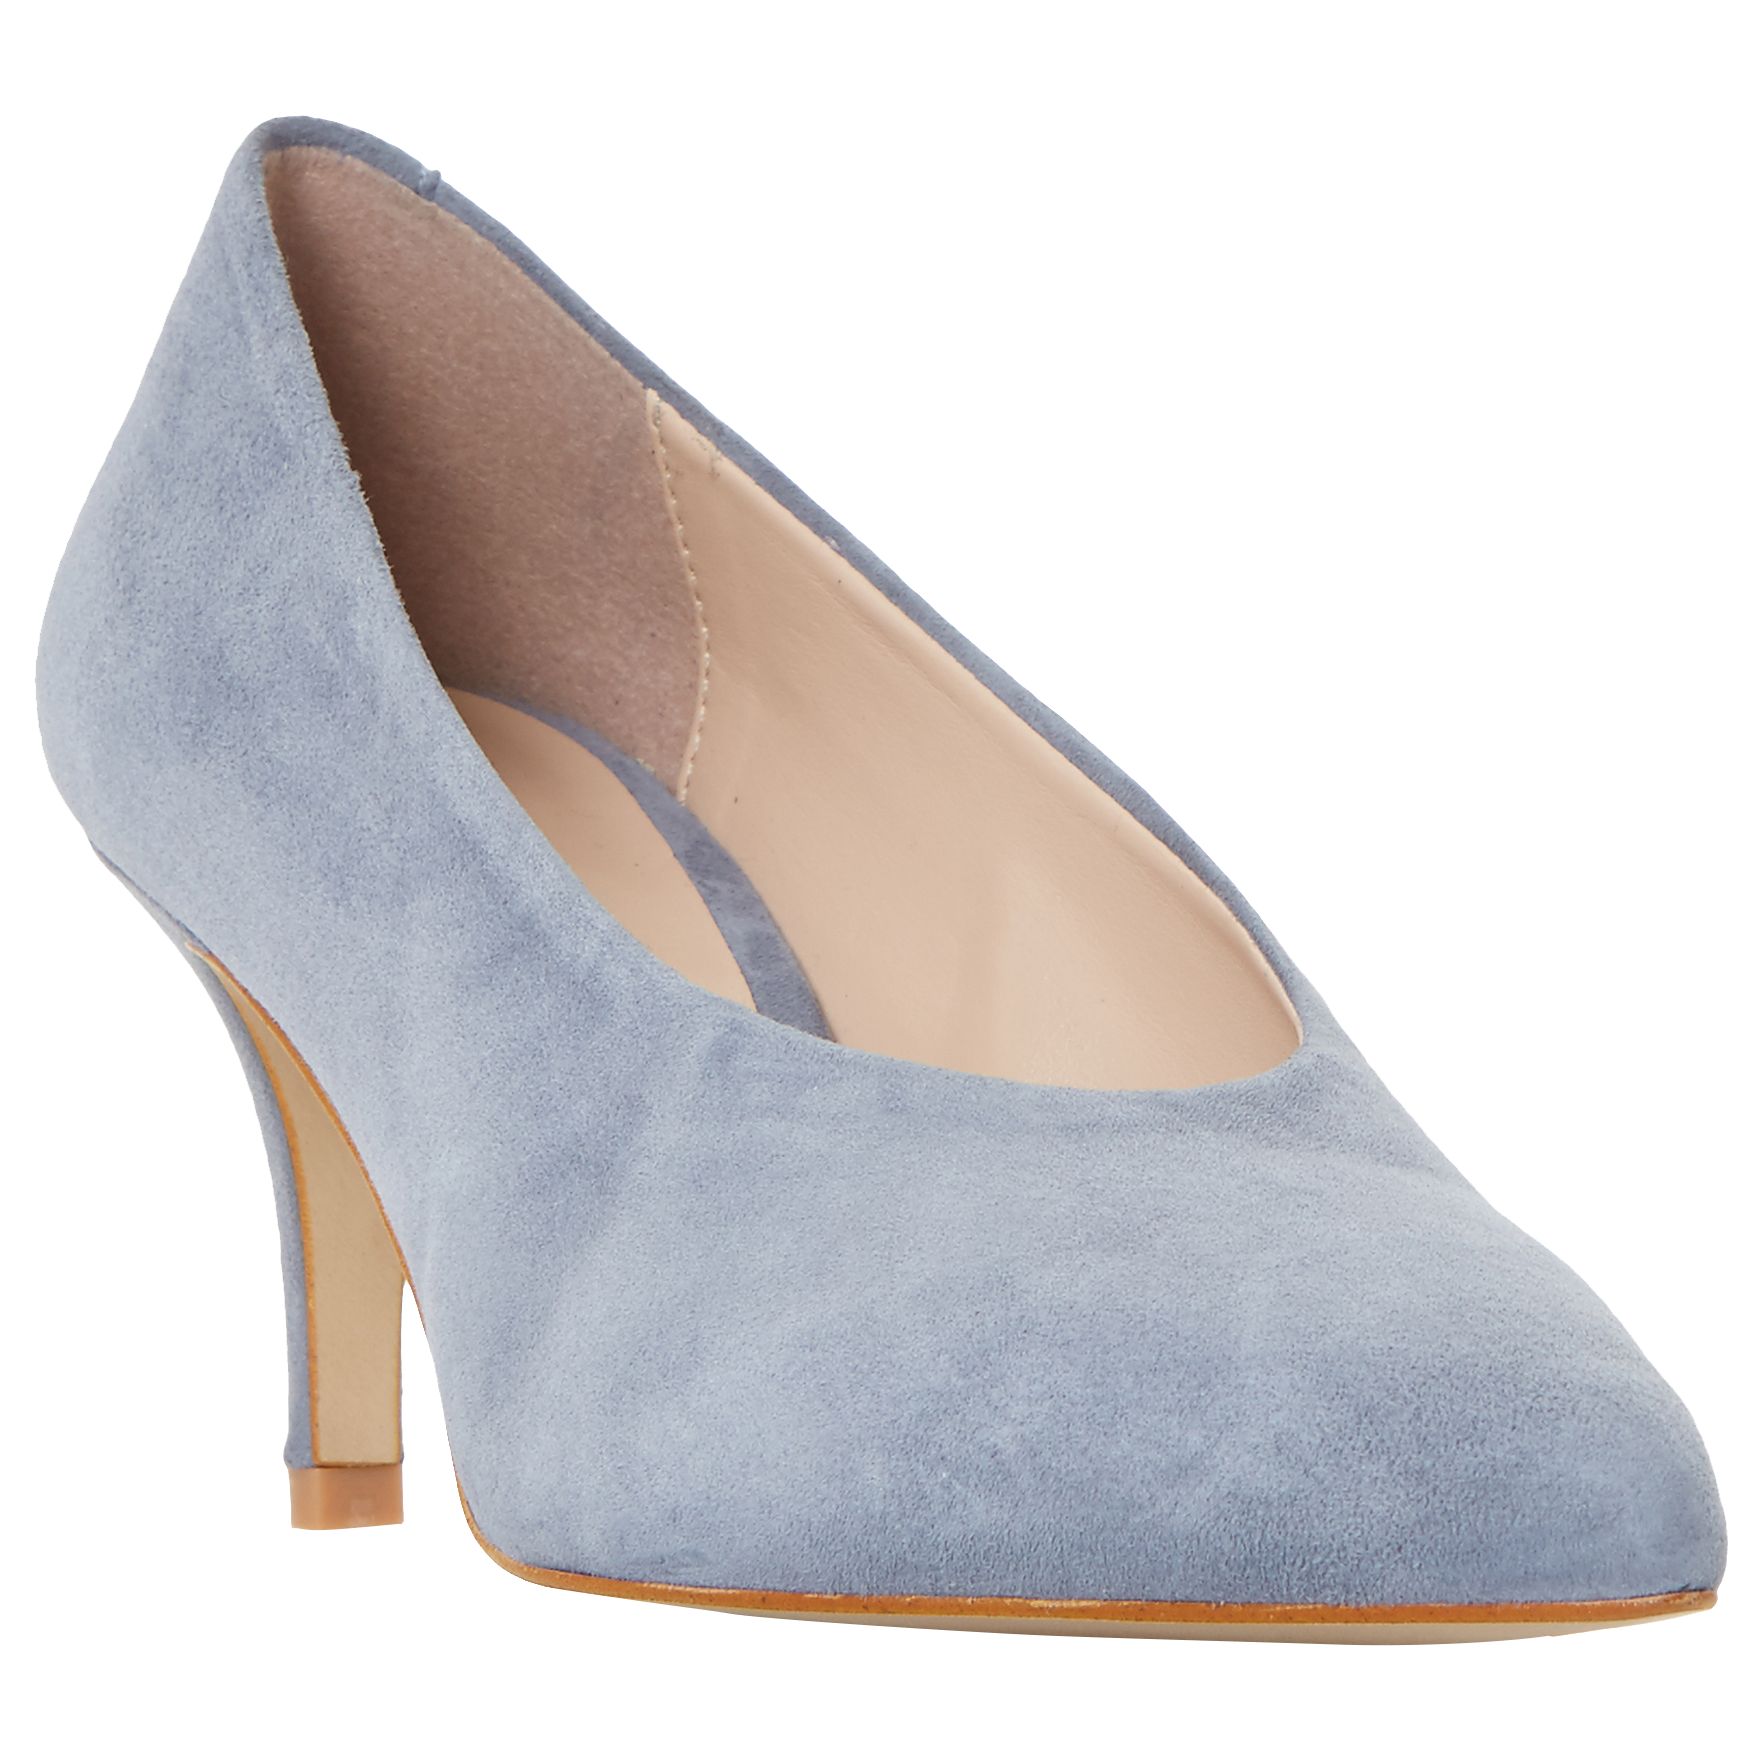 Dune Amorell Kitten Heeled Court Shoes, Grey Suede at John Lewis & Partners